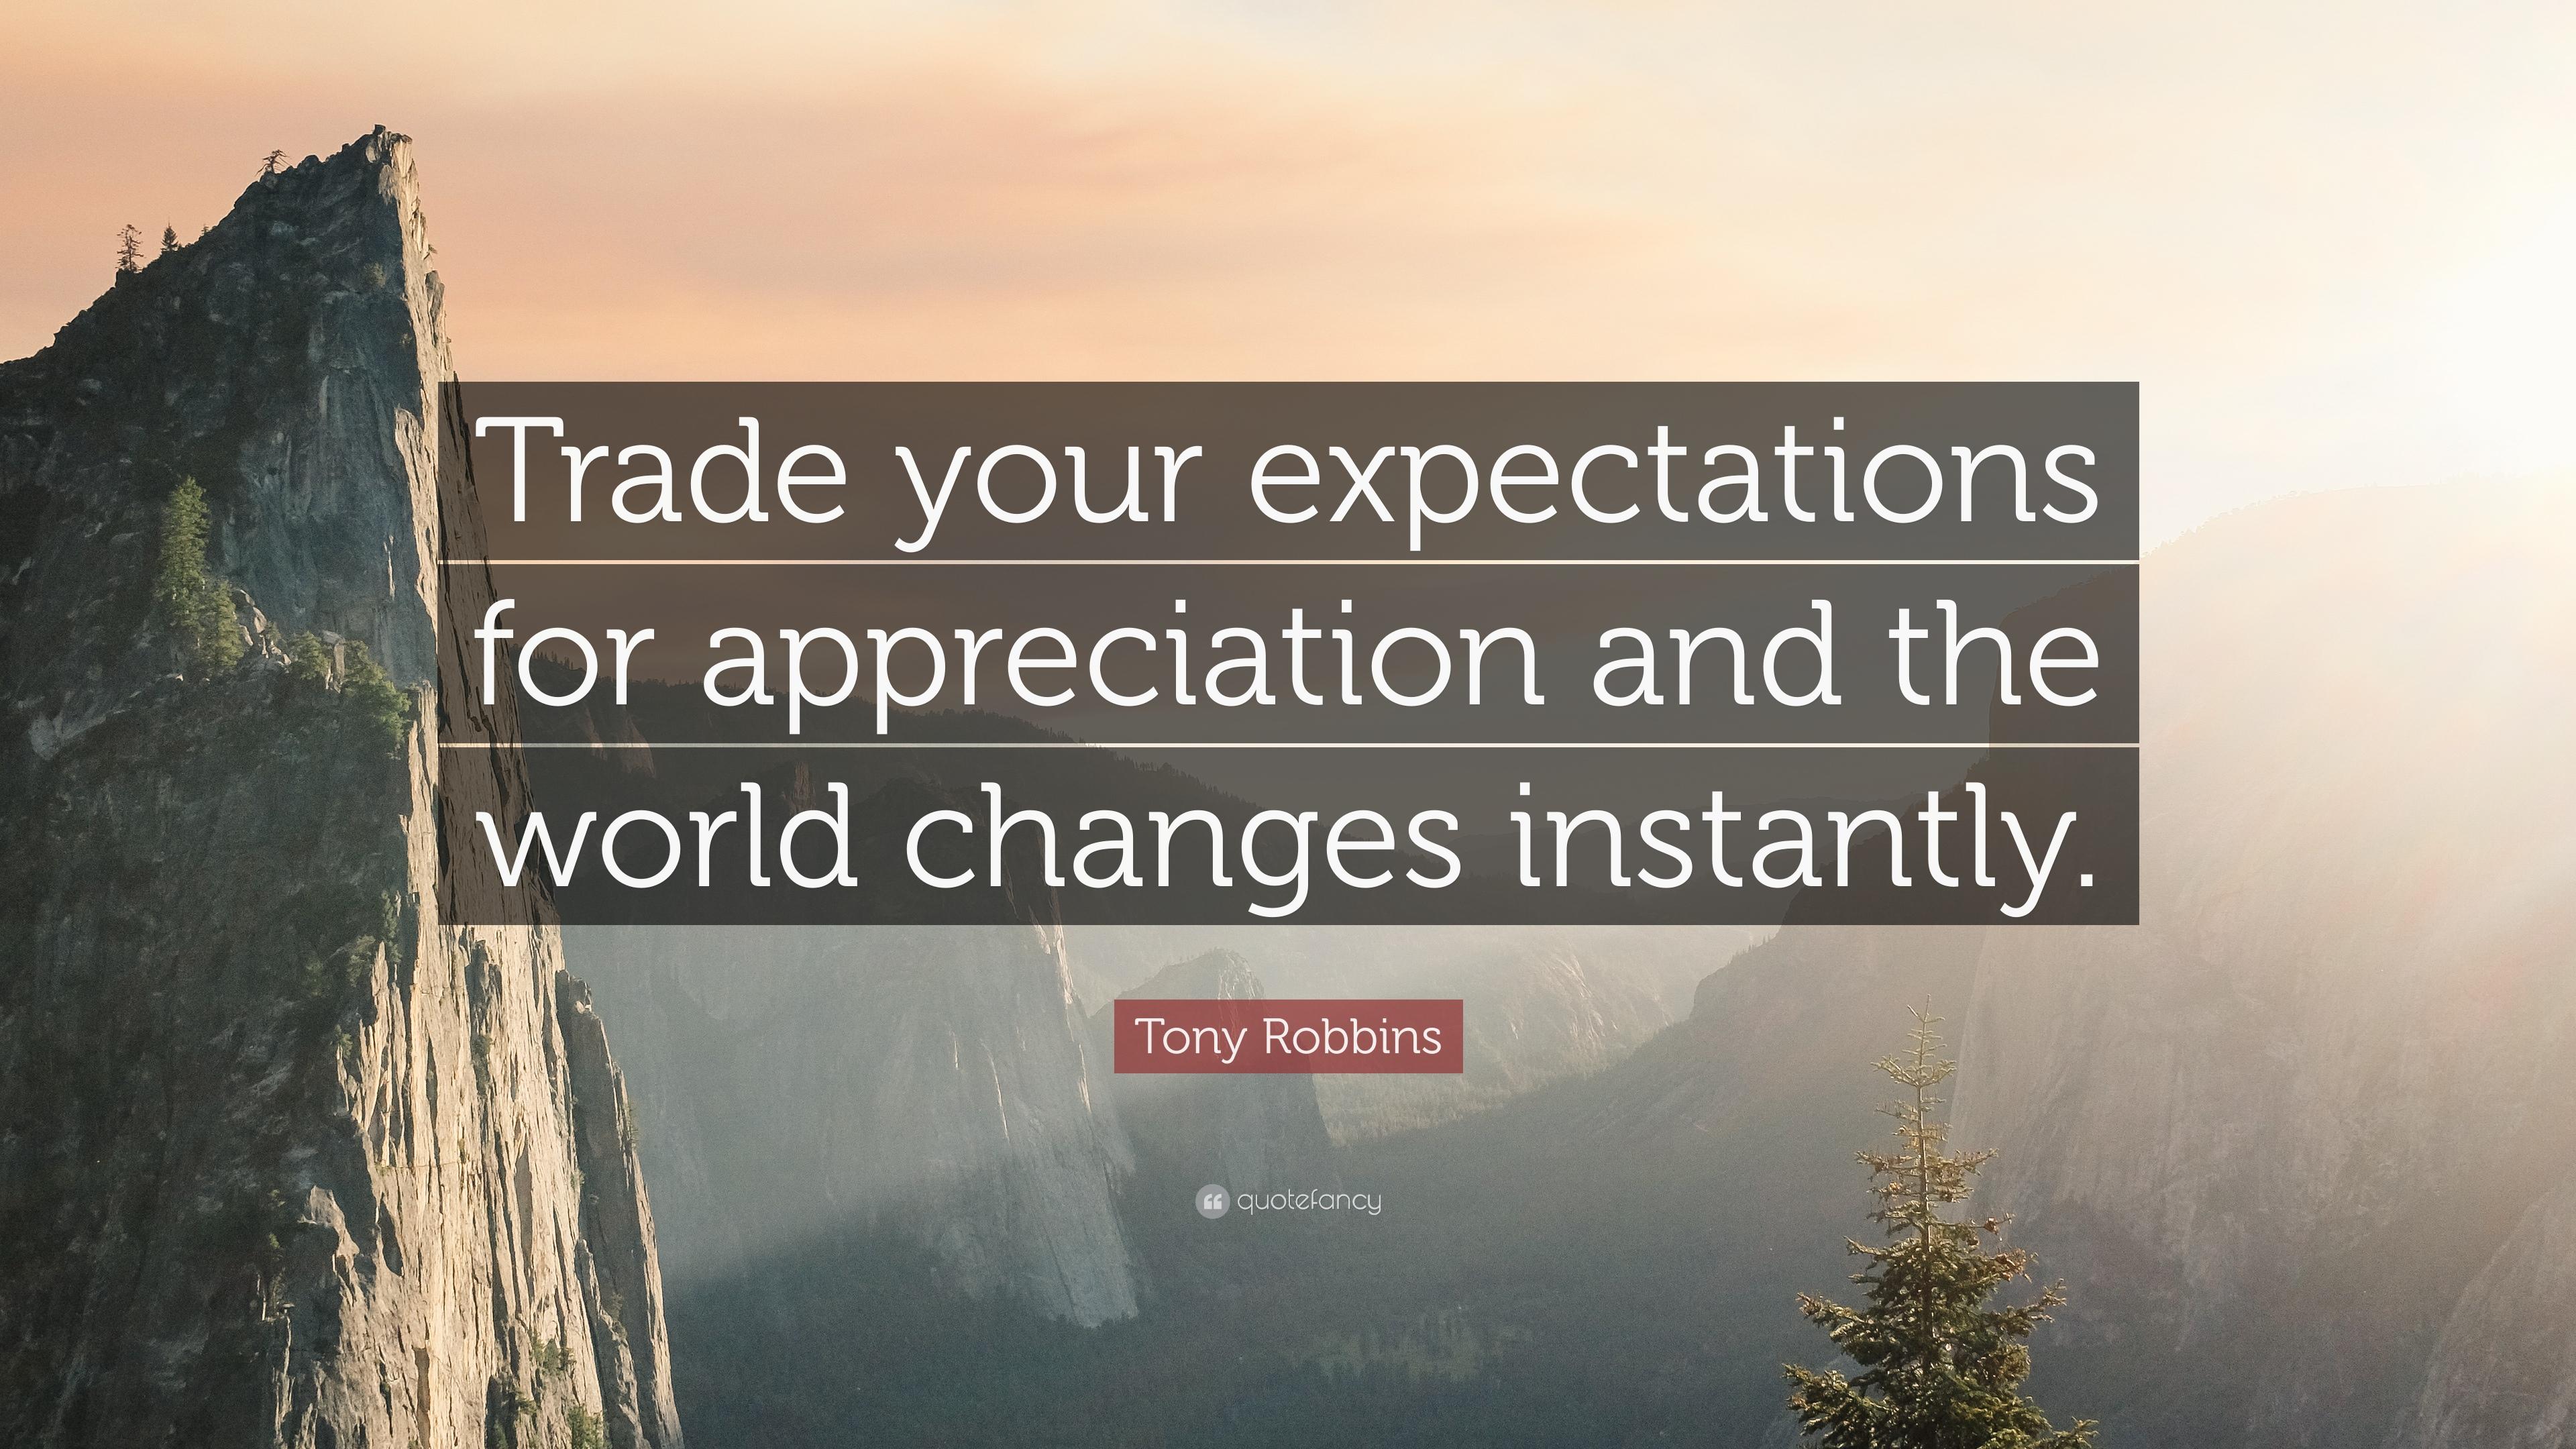 Tony Robbins Quote: “Trade your expectations